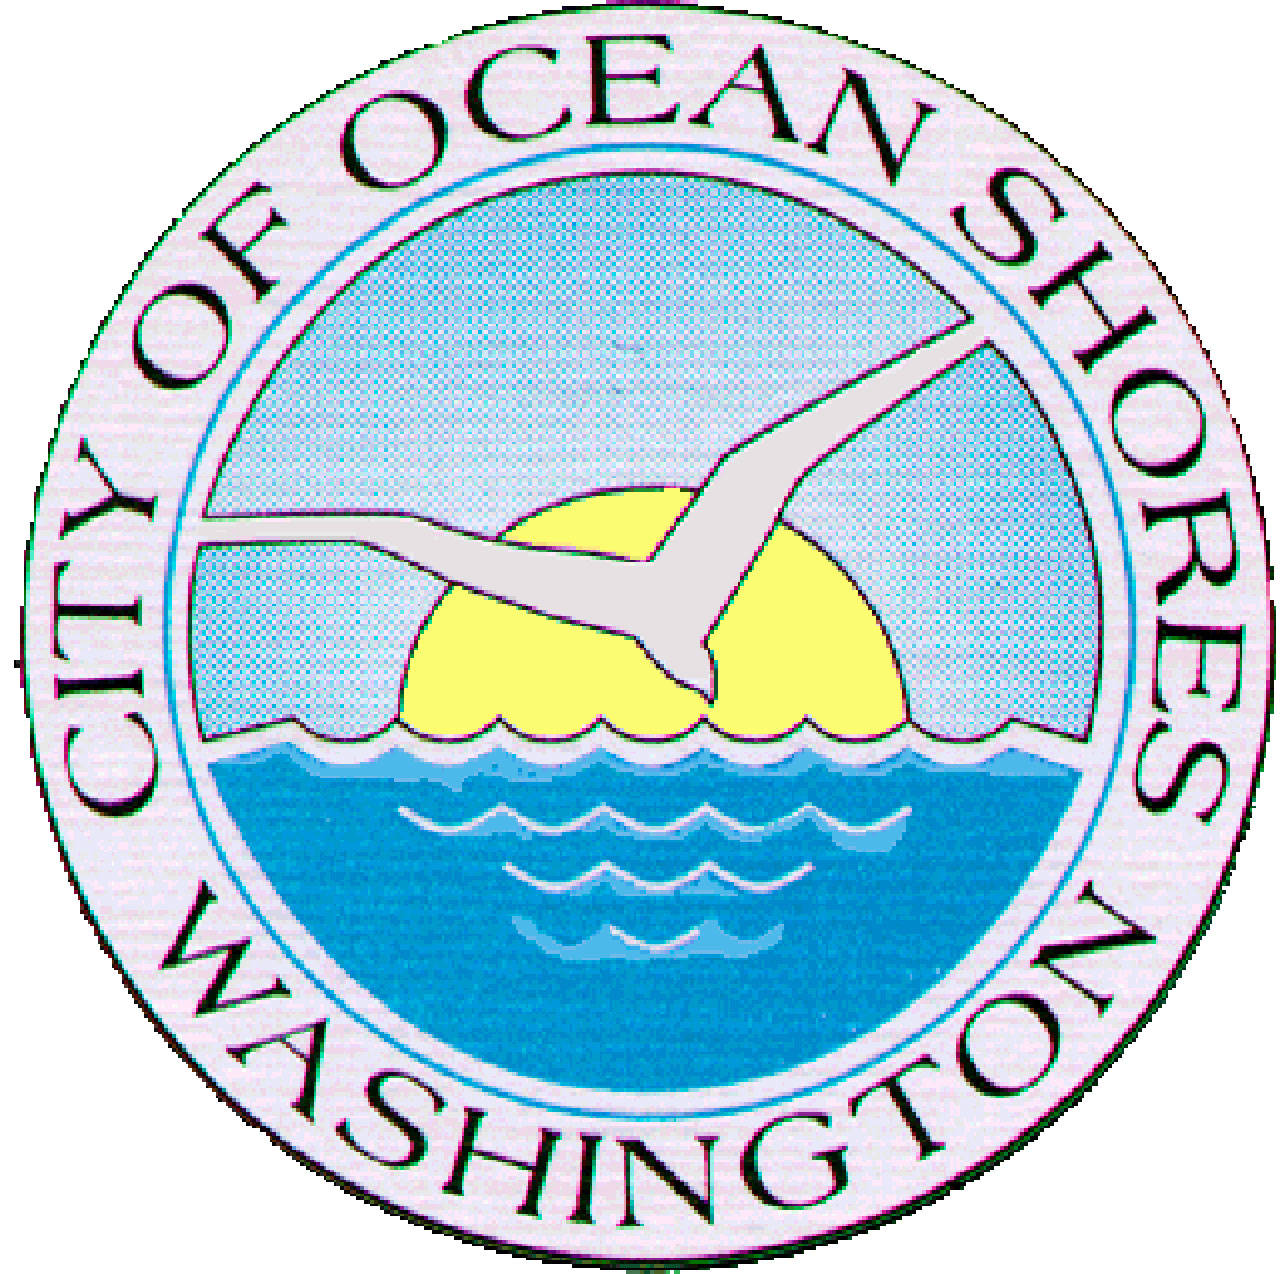 Ocean Shores enacts restrictions to control adult businesses